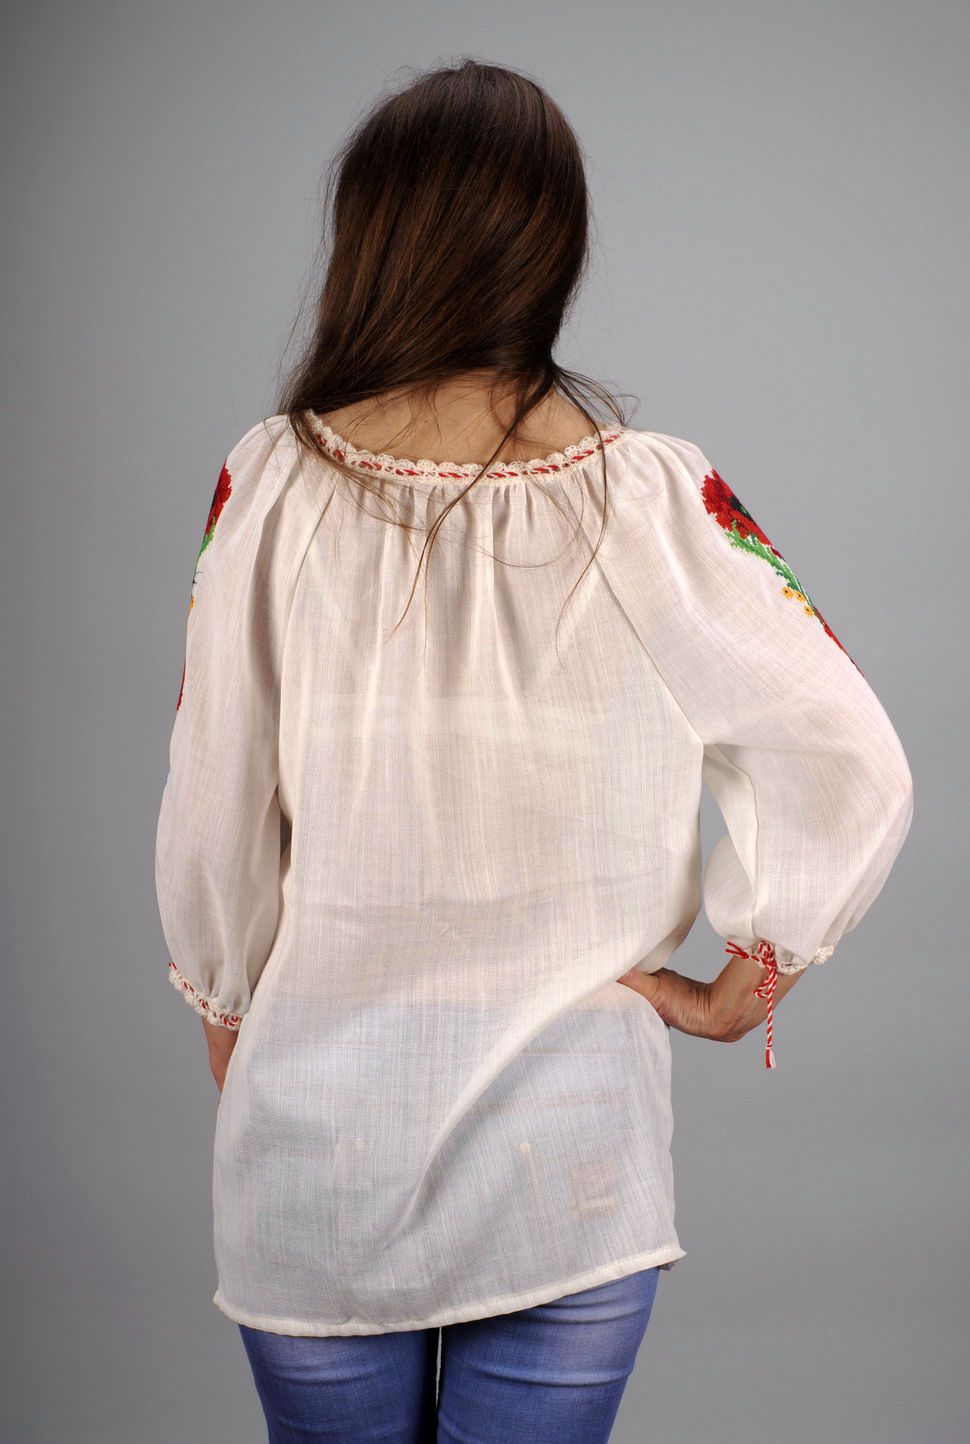 Embroidered shirt photo 3